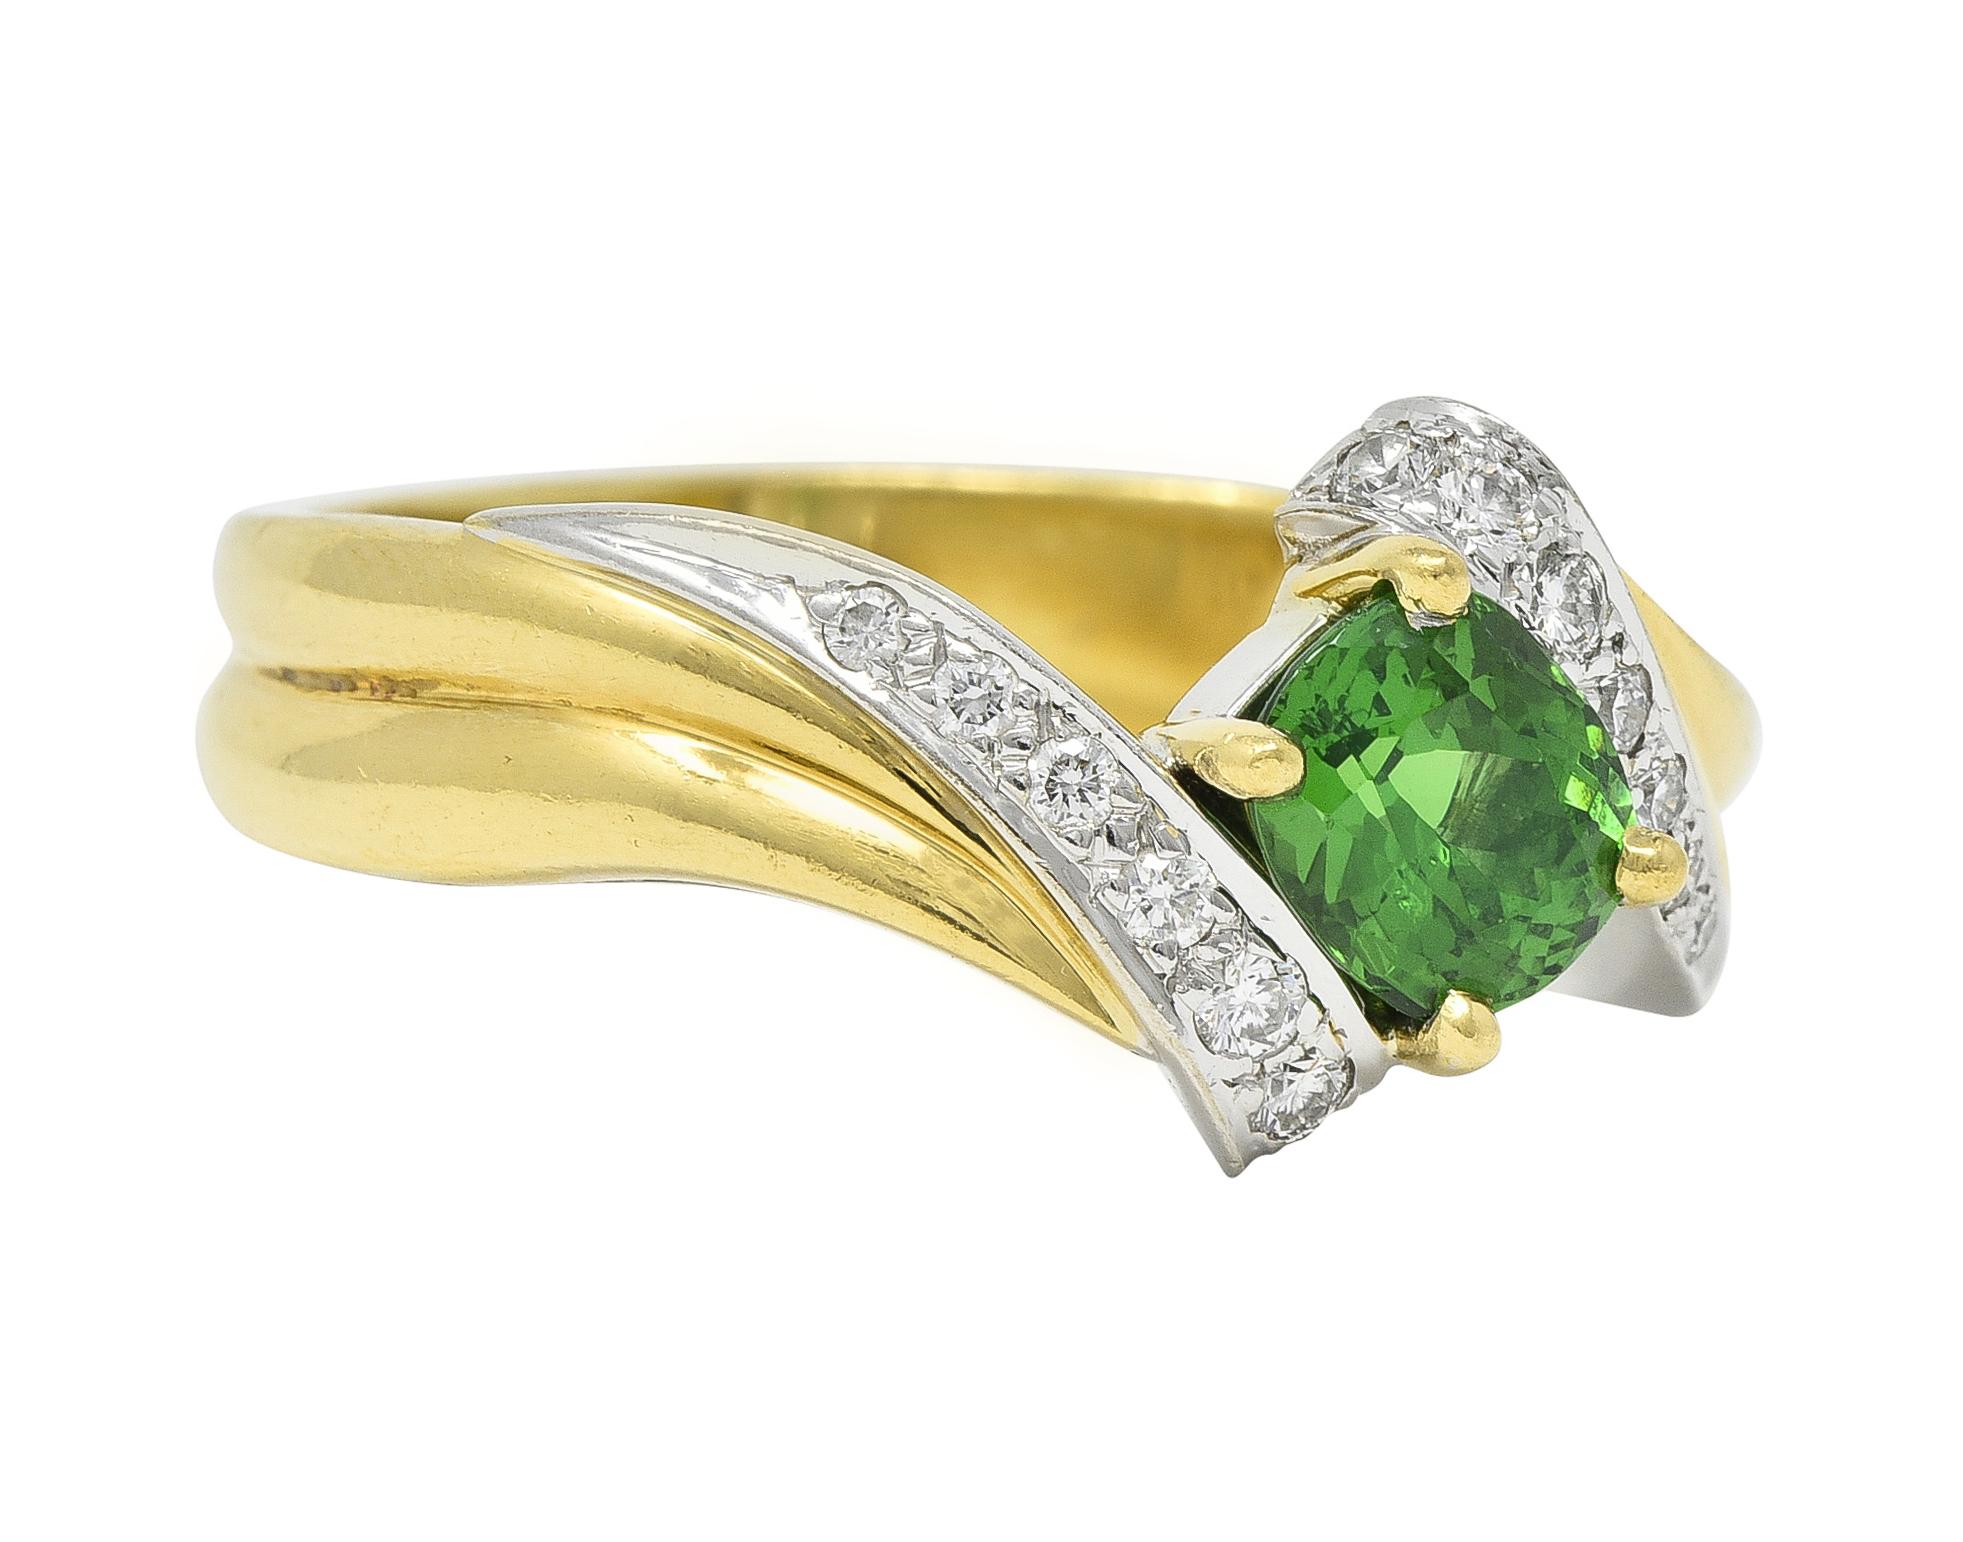 Centering a cushion cut tsavorite garnet weighing approximately 1.40 carats 
Transparent bright green in color - prong set in basket
Flanked by swirling bypass style shoulders 
Grooved with white gold segments
Bead set with round brilliant cut